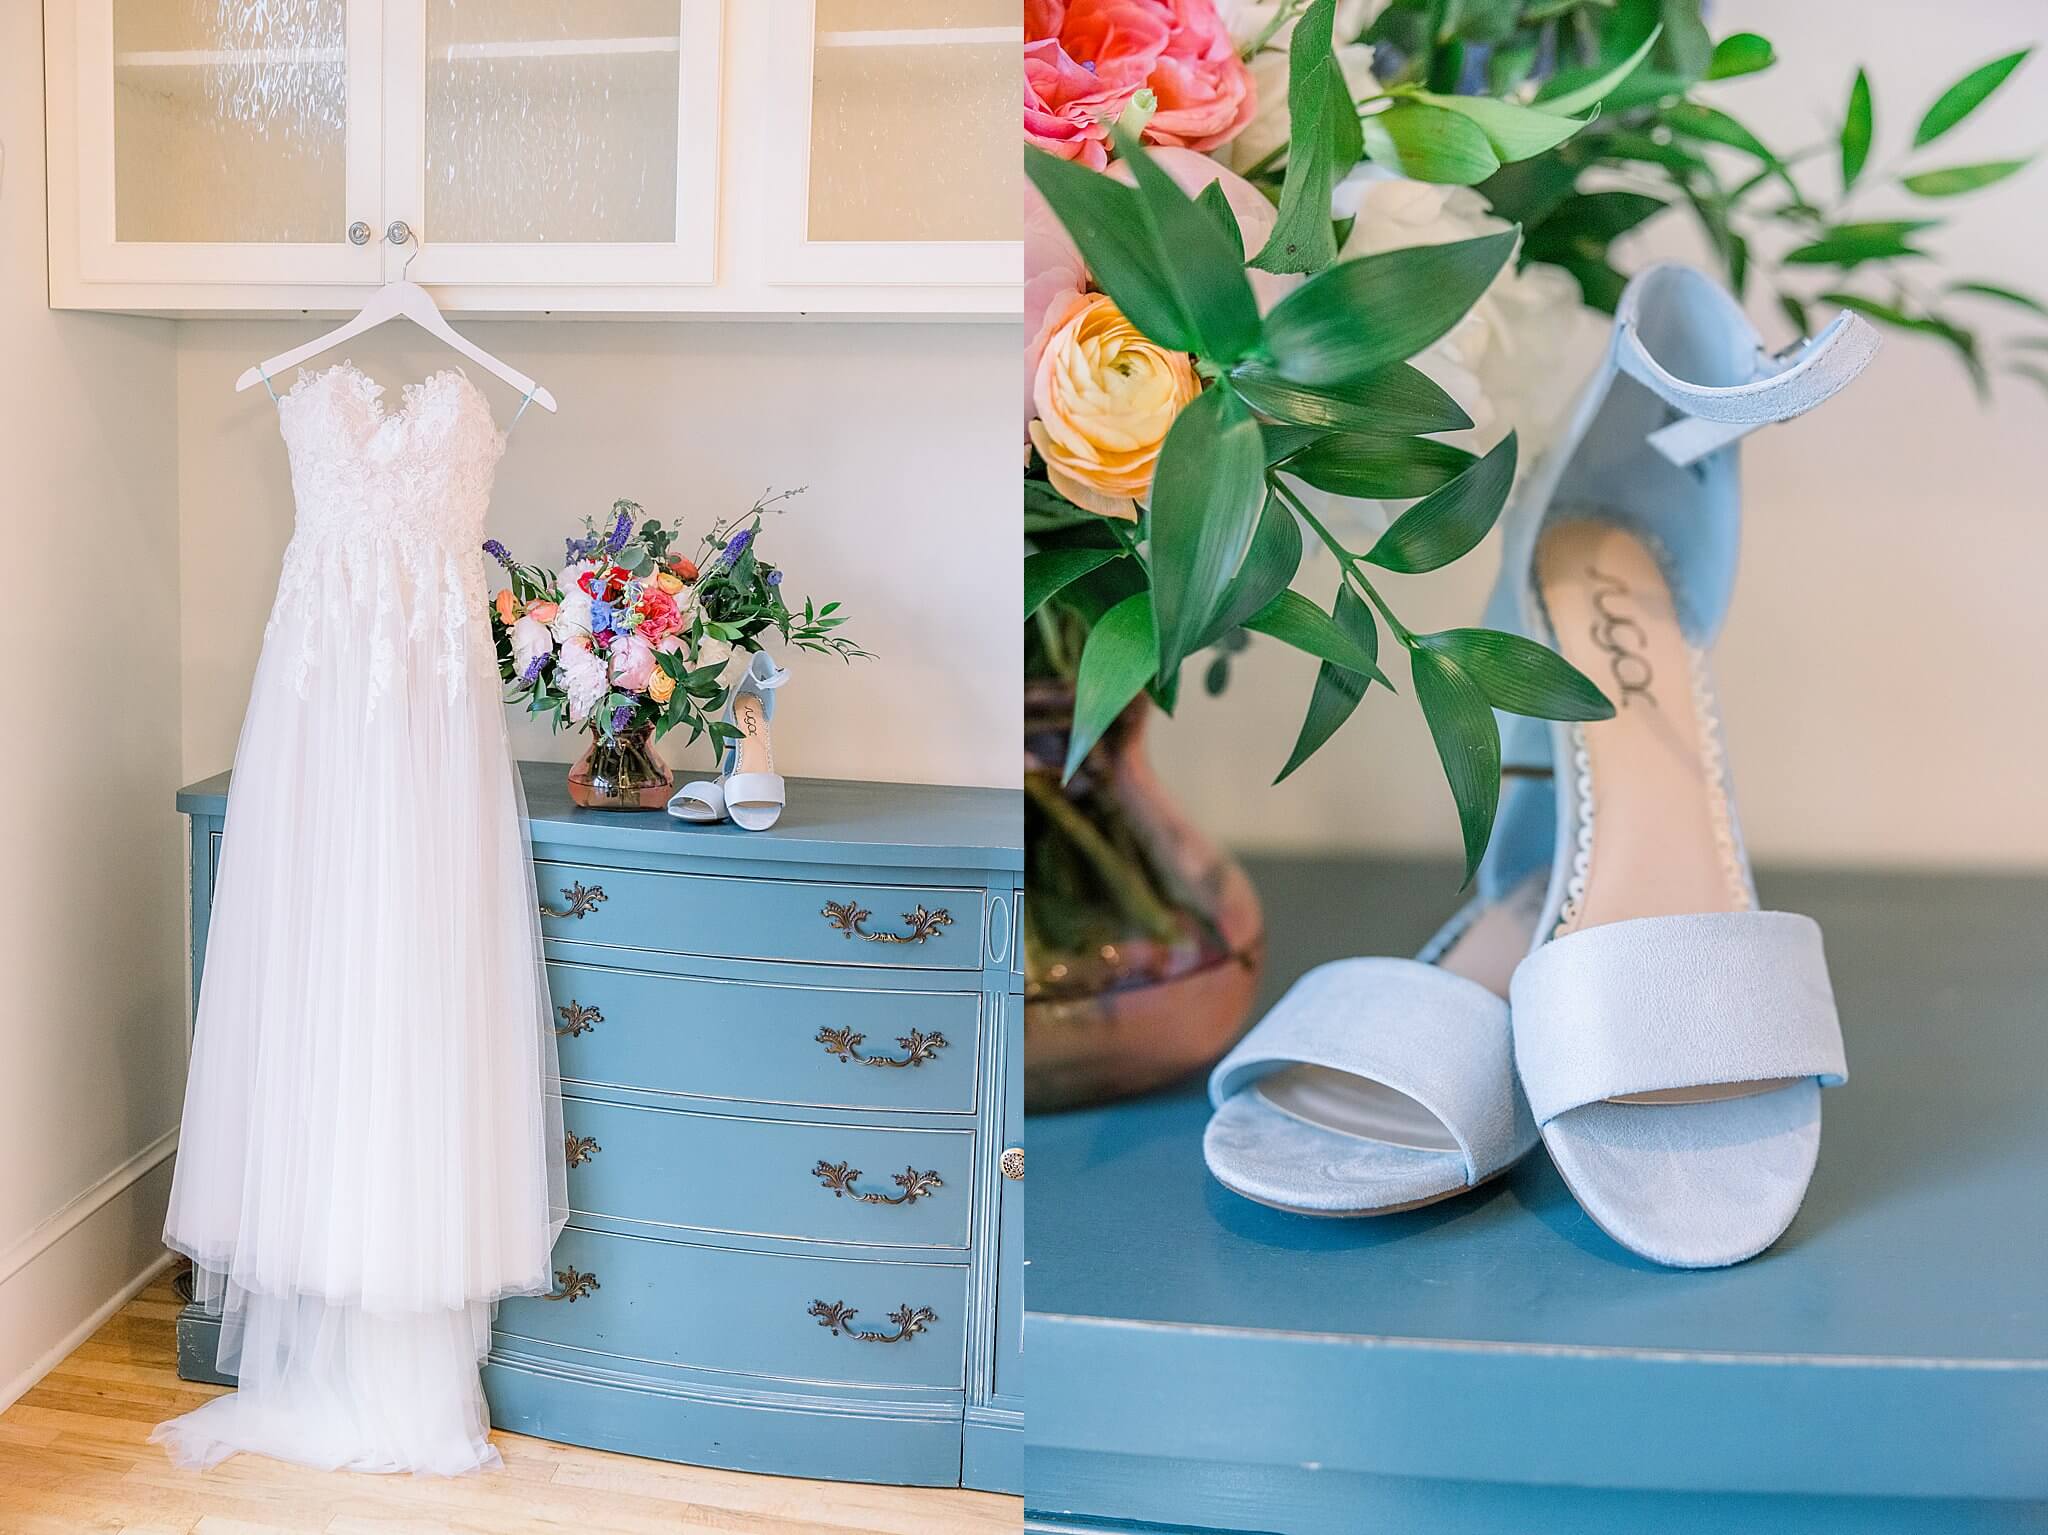 Brides dress hangs in front of vintage blue dresser during rainy Traverse City wedding.